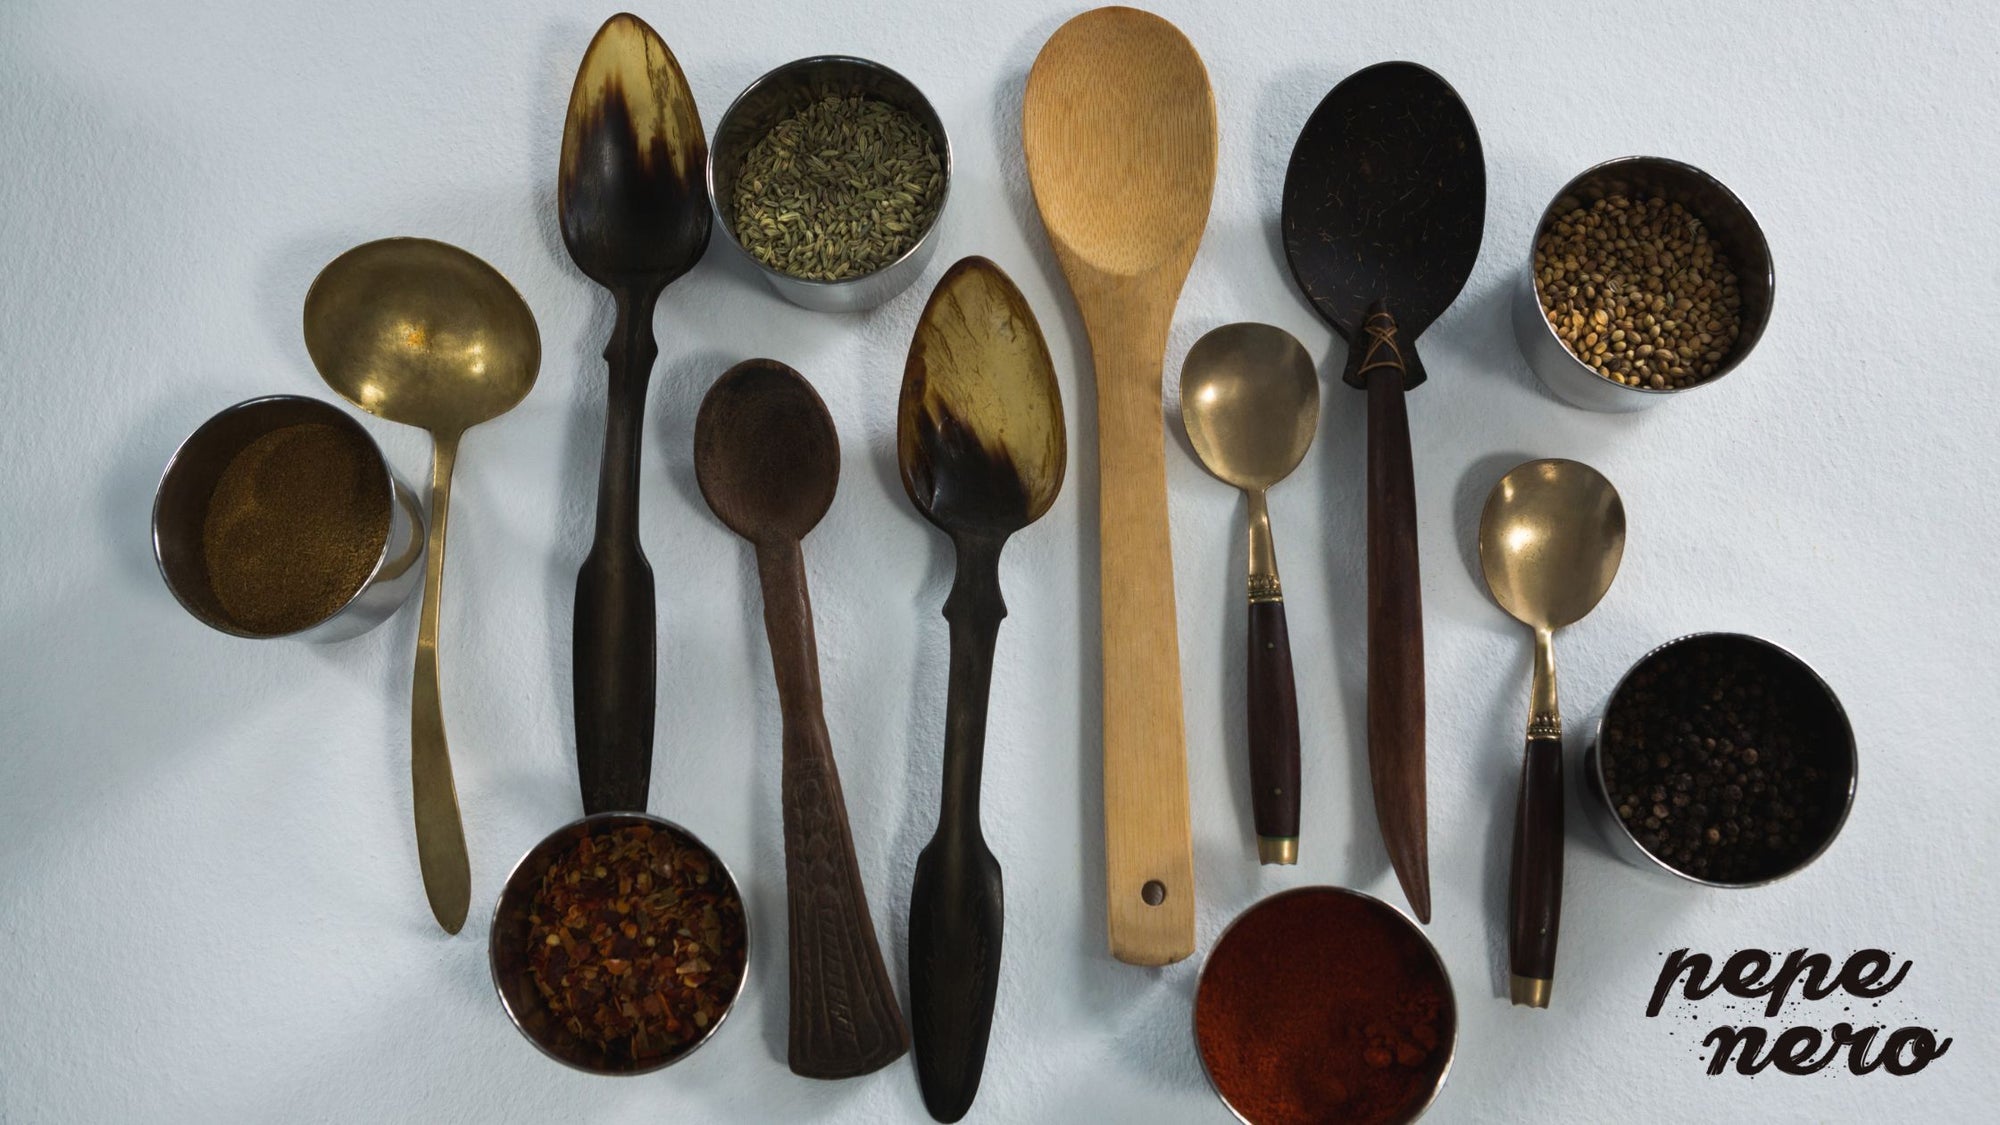 A variety of different shapes and sizes of spoons